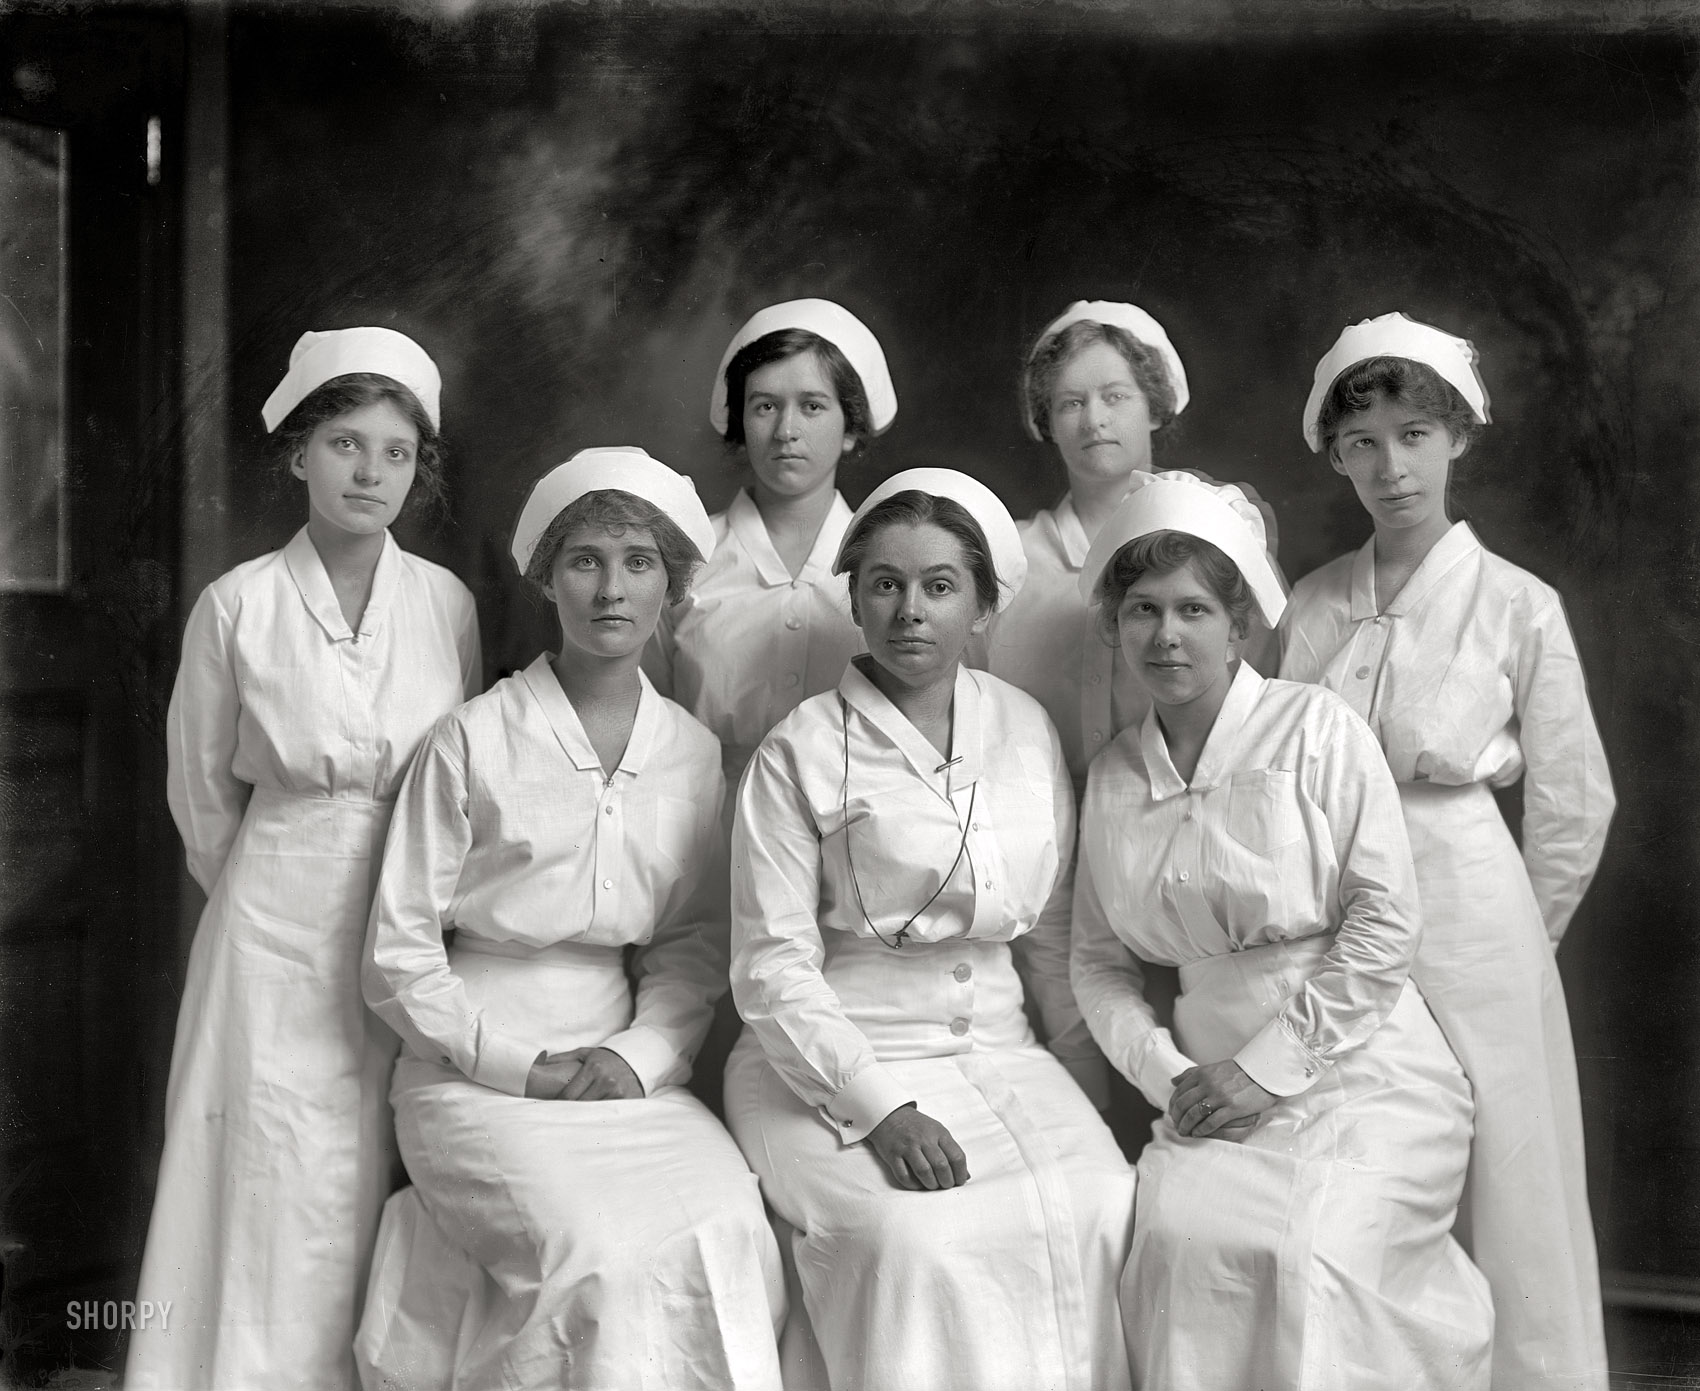 Circa 1920. "Emergency Hospital group." Uniformed Authority Figure Week continues at Shorpy! Harris & Ewing Collection glass negative. View full size.